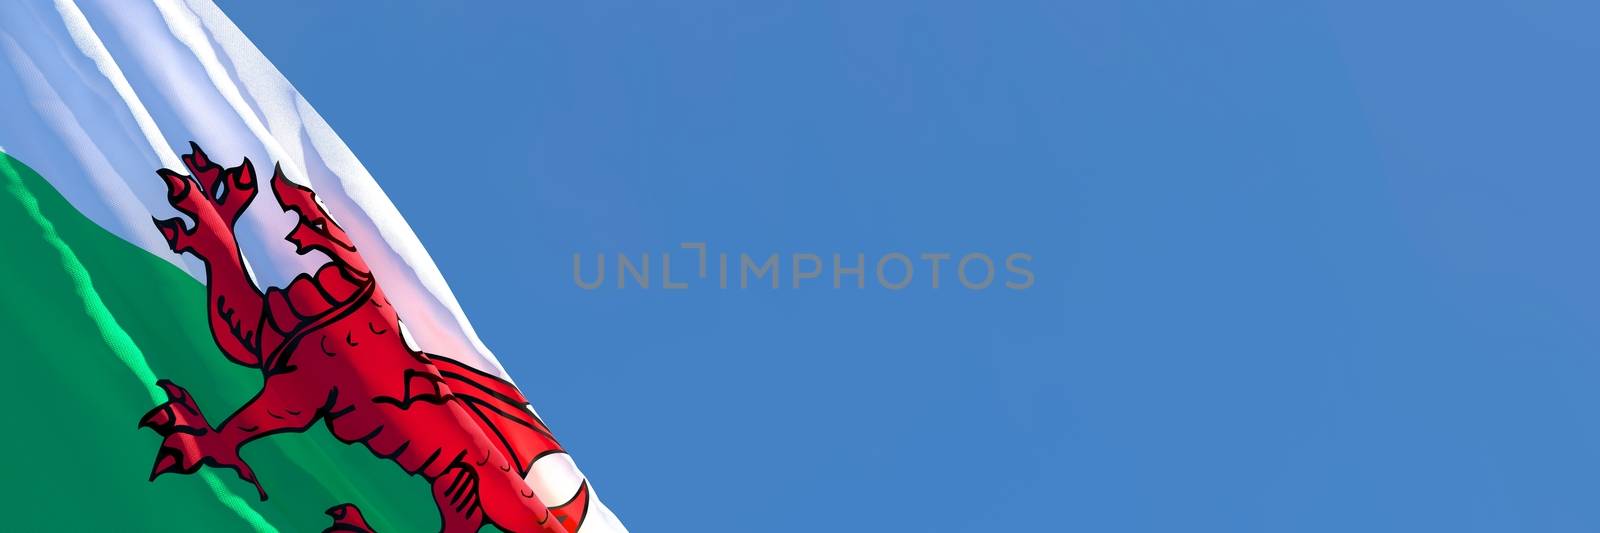 3D rendering of the national flag of Wales waving in the wind against a blue sky